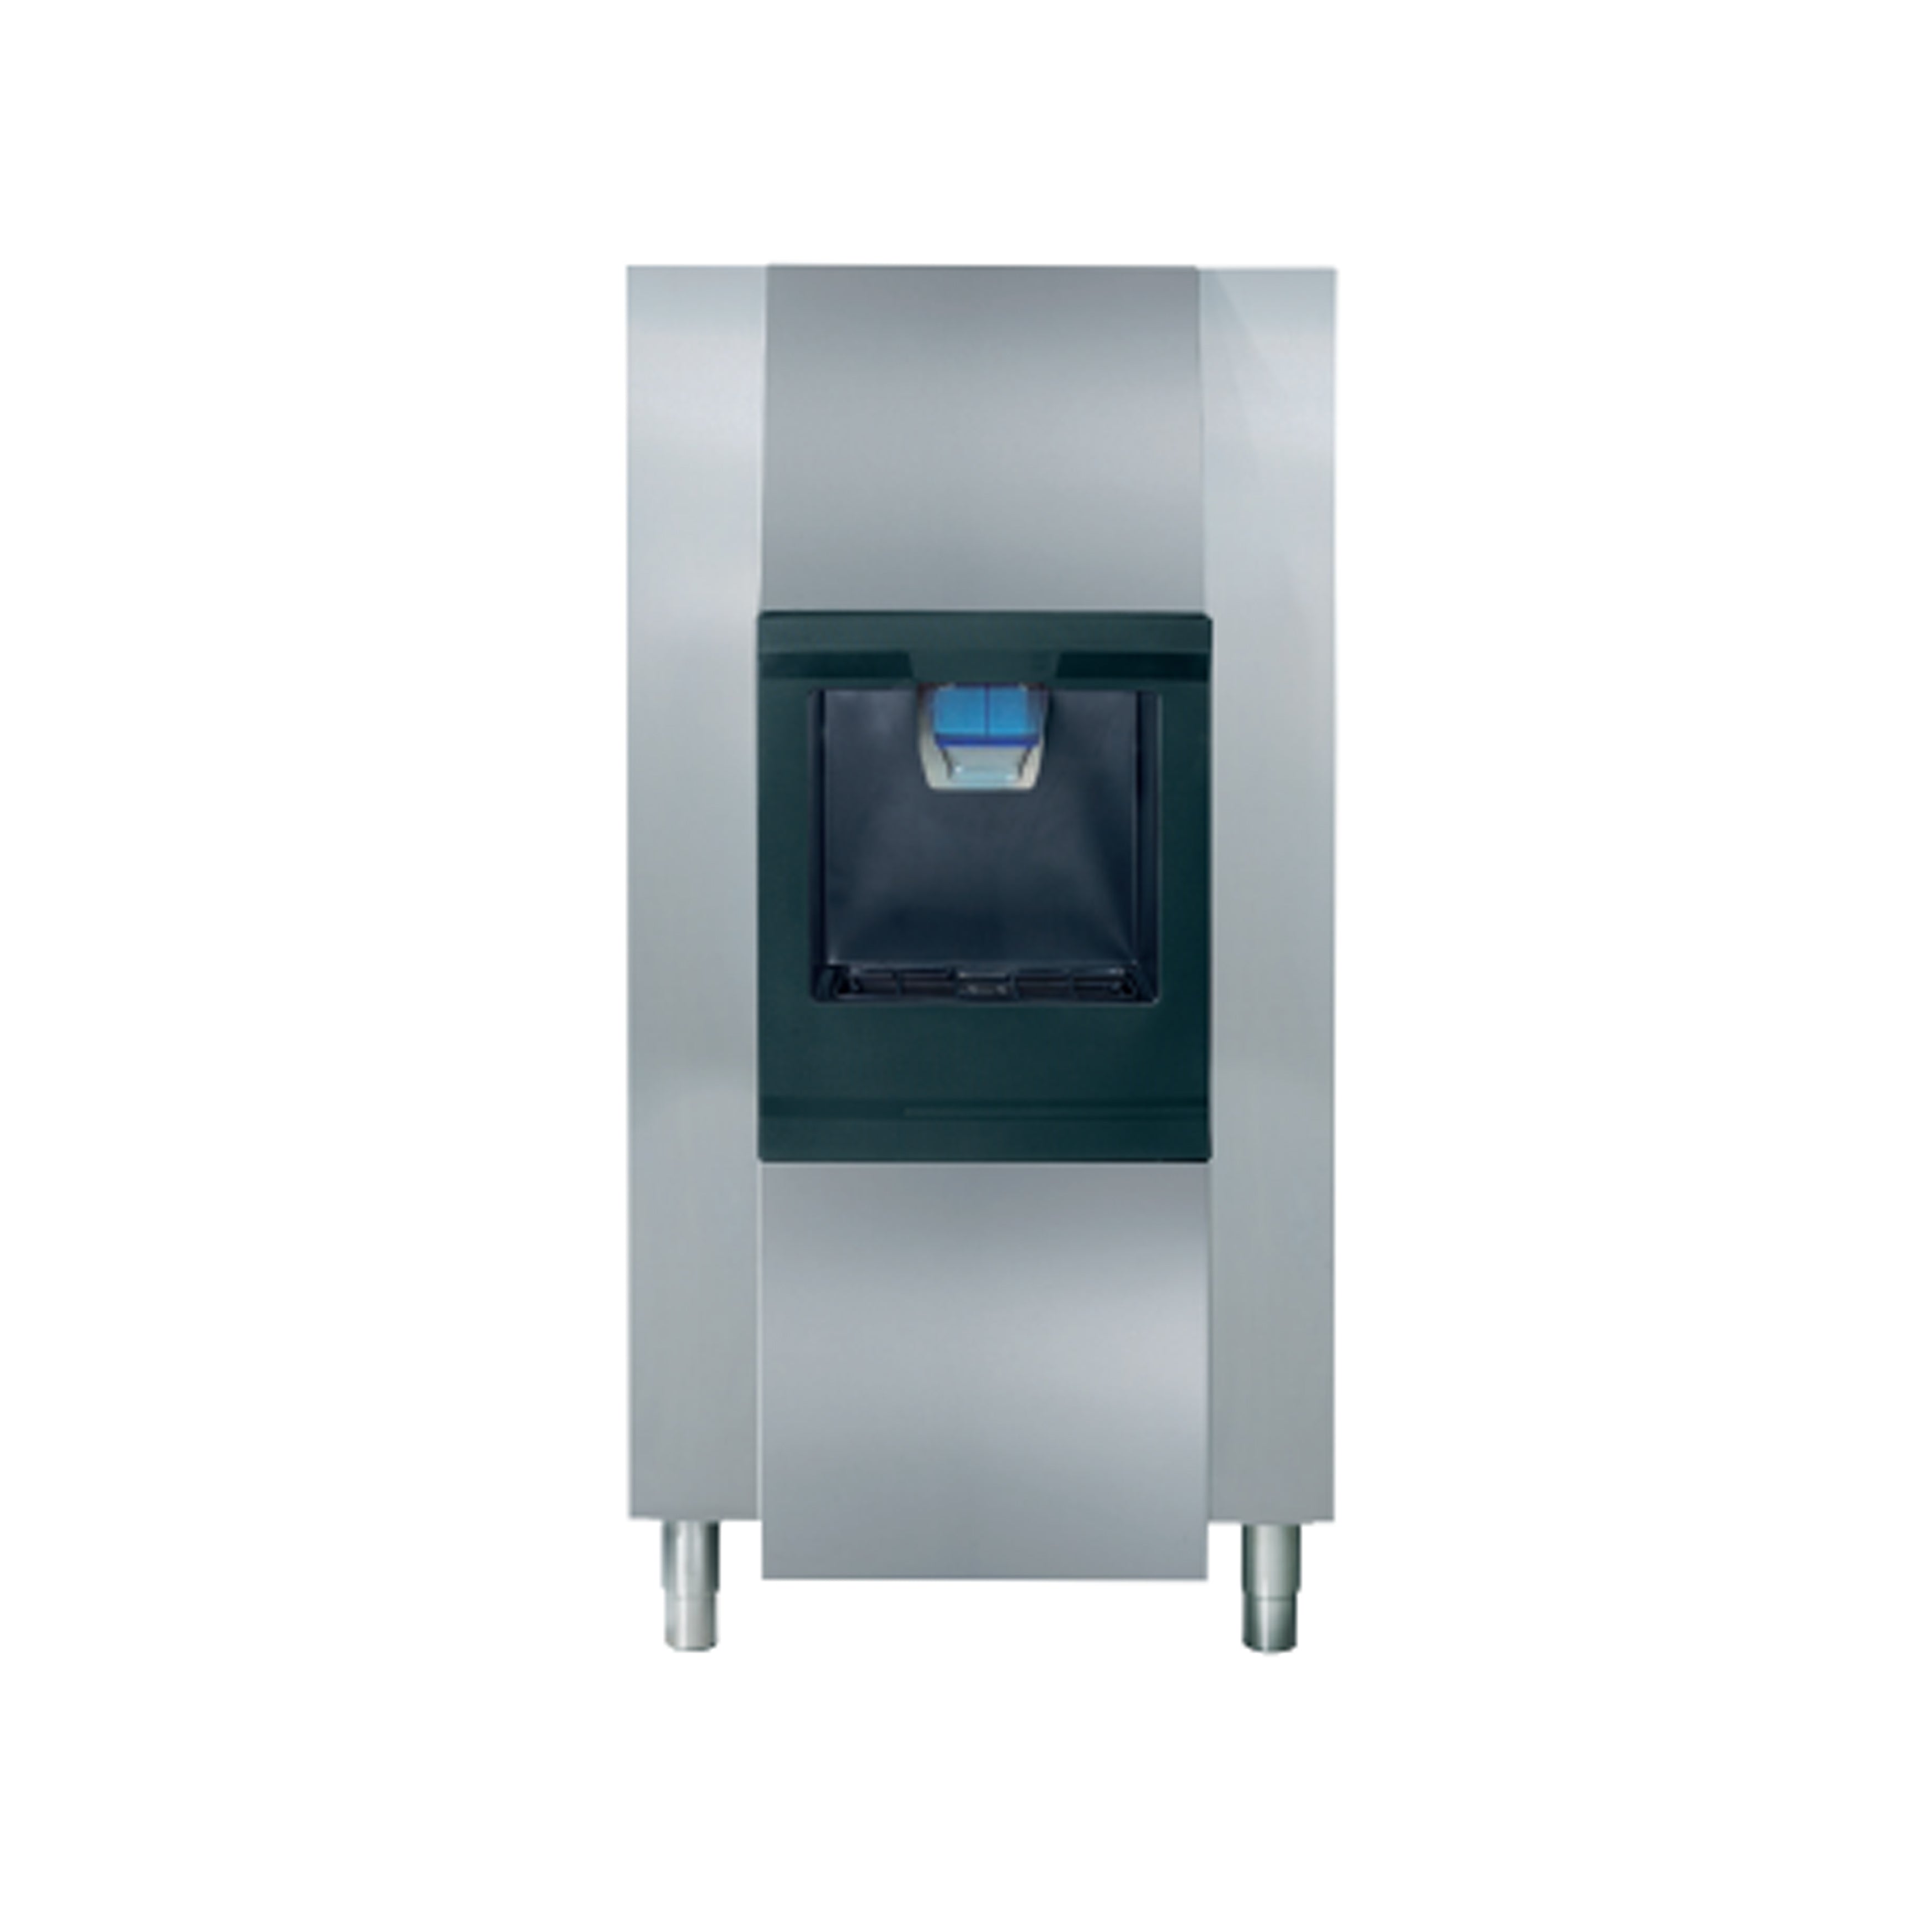 ITV - SIRION DHD 200-30, Commercial Ice Dispenser for Spika Ice Machine Series Ice Cube Maker 183lbs